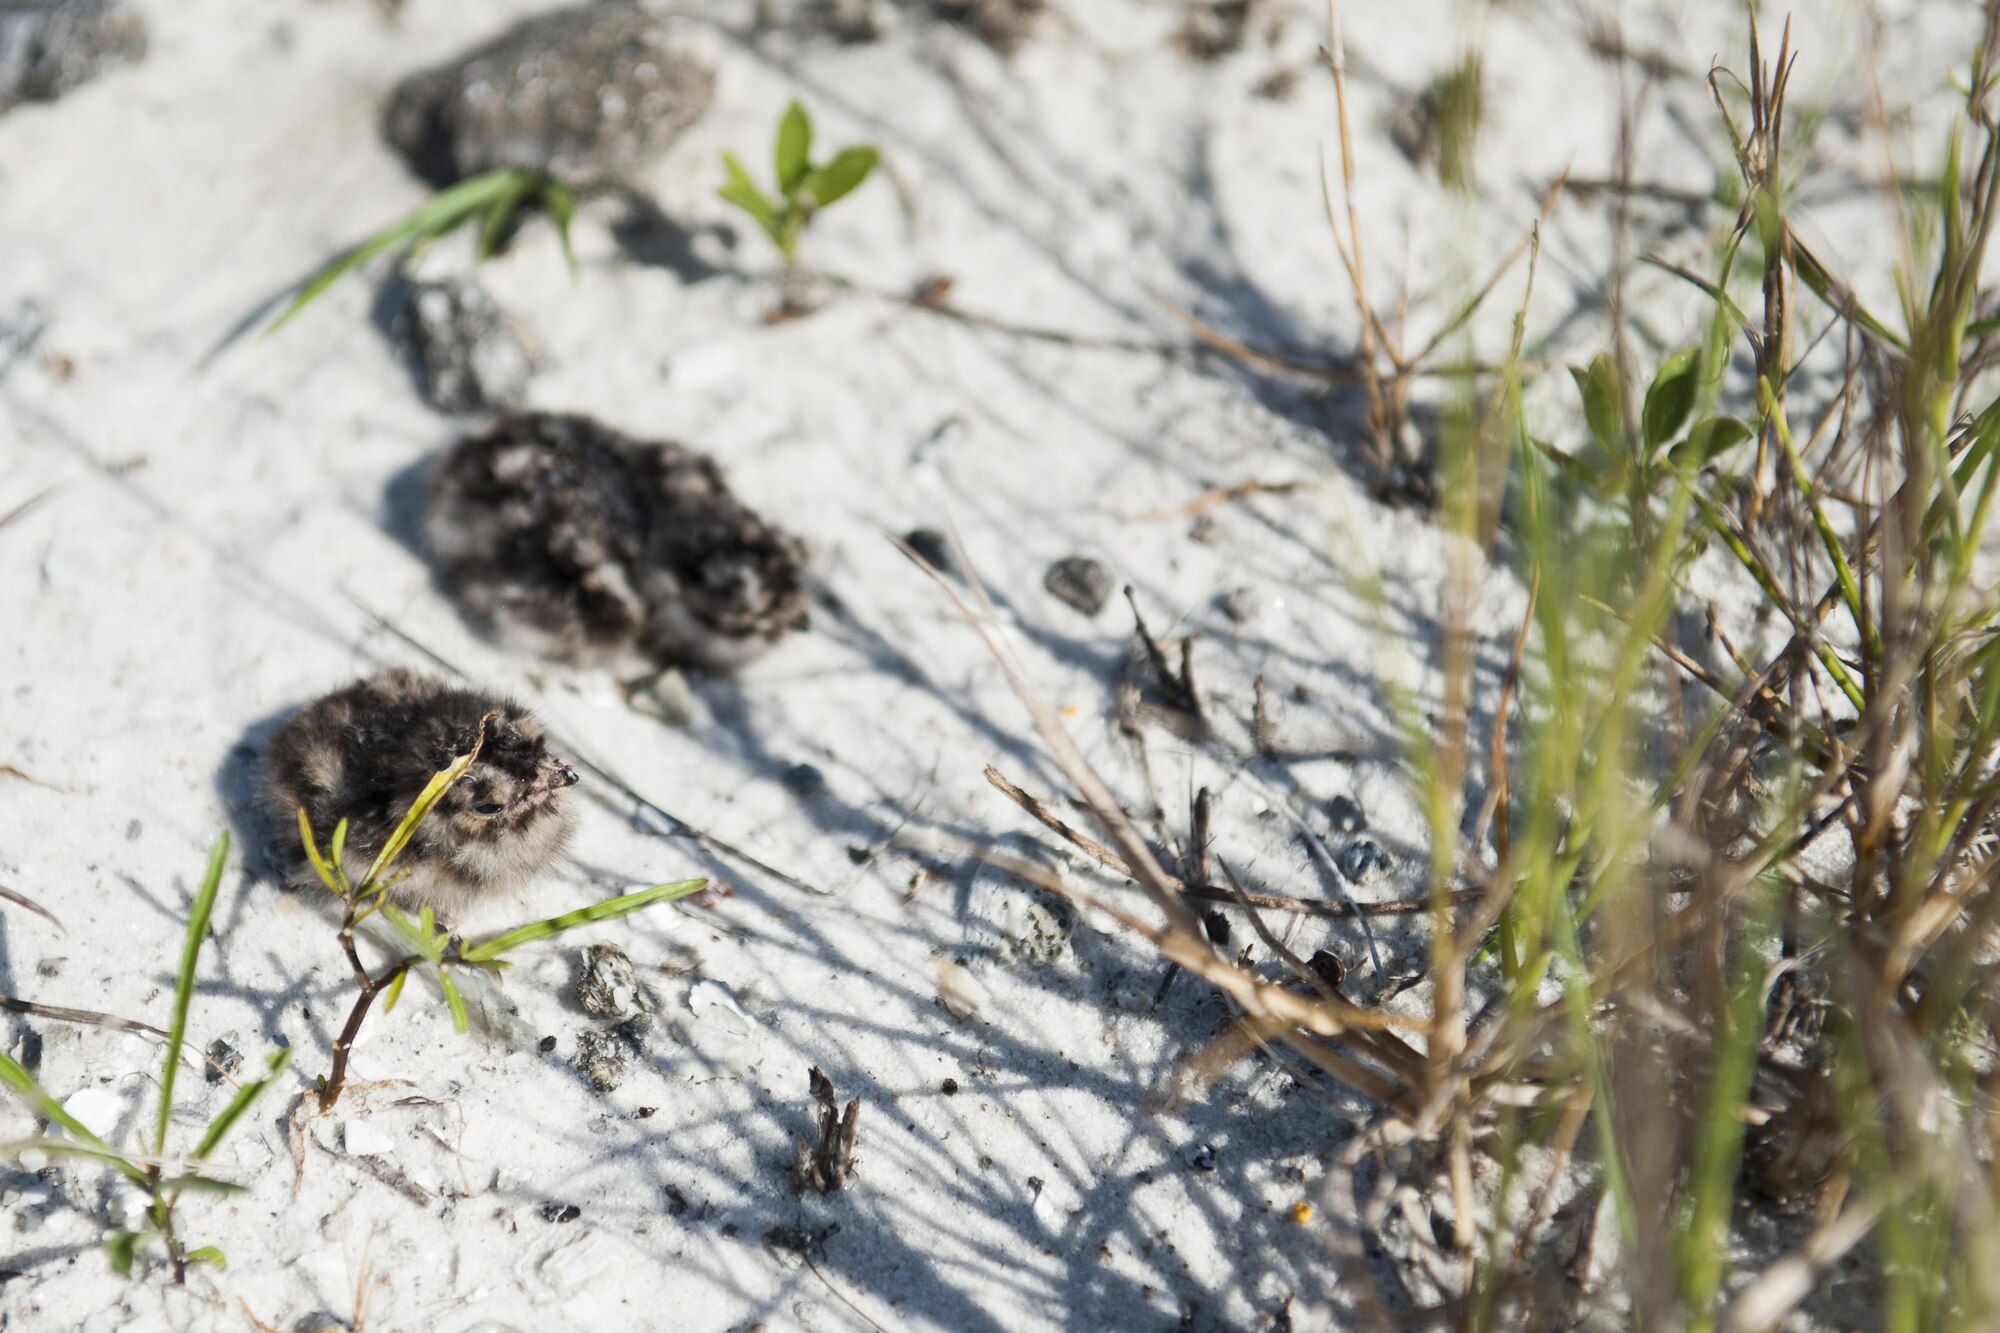 Two common nighthawk chicks wait for their mother's return on the Santa Rosa Island Range July 14 at Eglin Air Force Base, Fla. Nighthawks are known for nesting on open ground. The 96th Civil Engineer Group’s, Jackson Guard biologists and volunteers track and monitor wildlife on the littoral range here. The information gathered is used to avoid and protect wildlife during military test and training missions. (U.S. Air Force photo/Ilka Cole) 